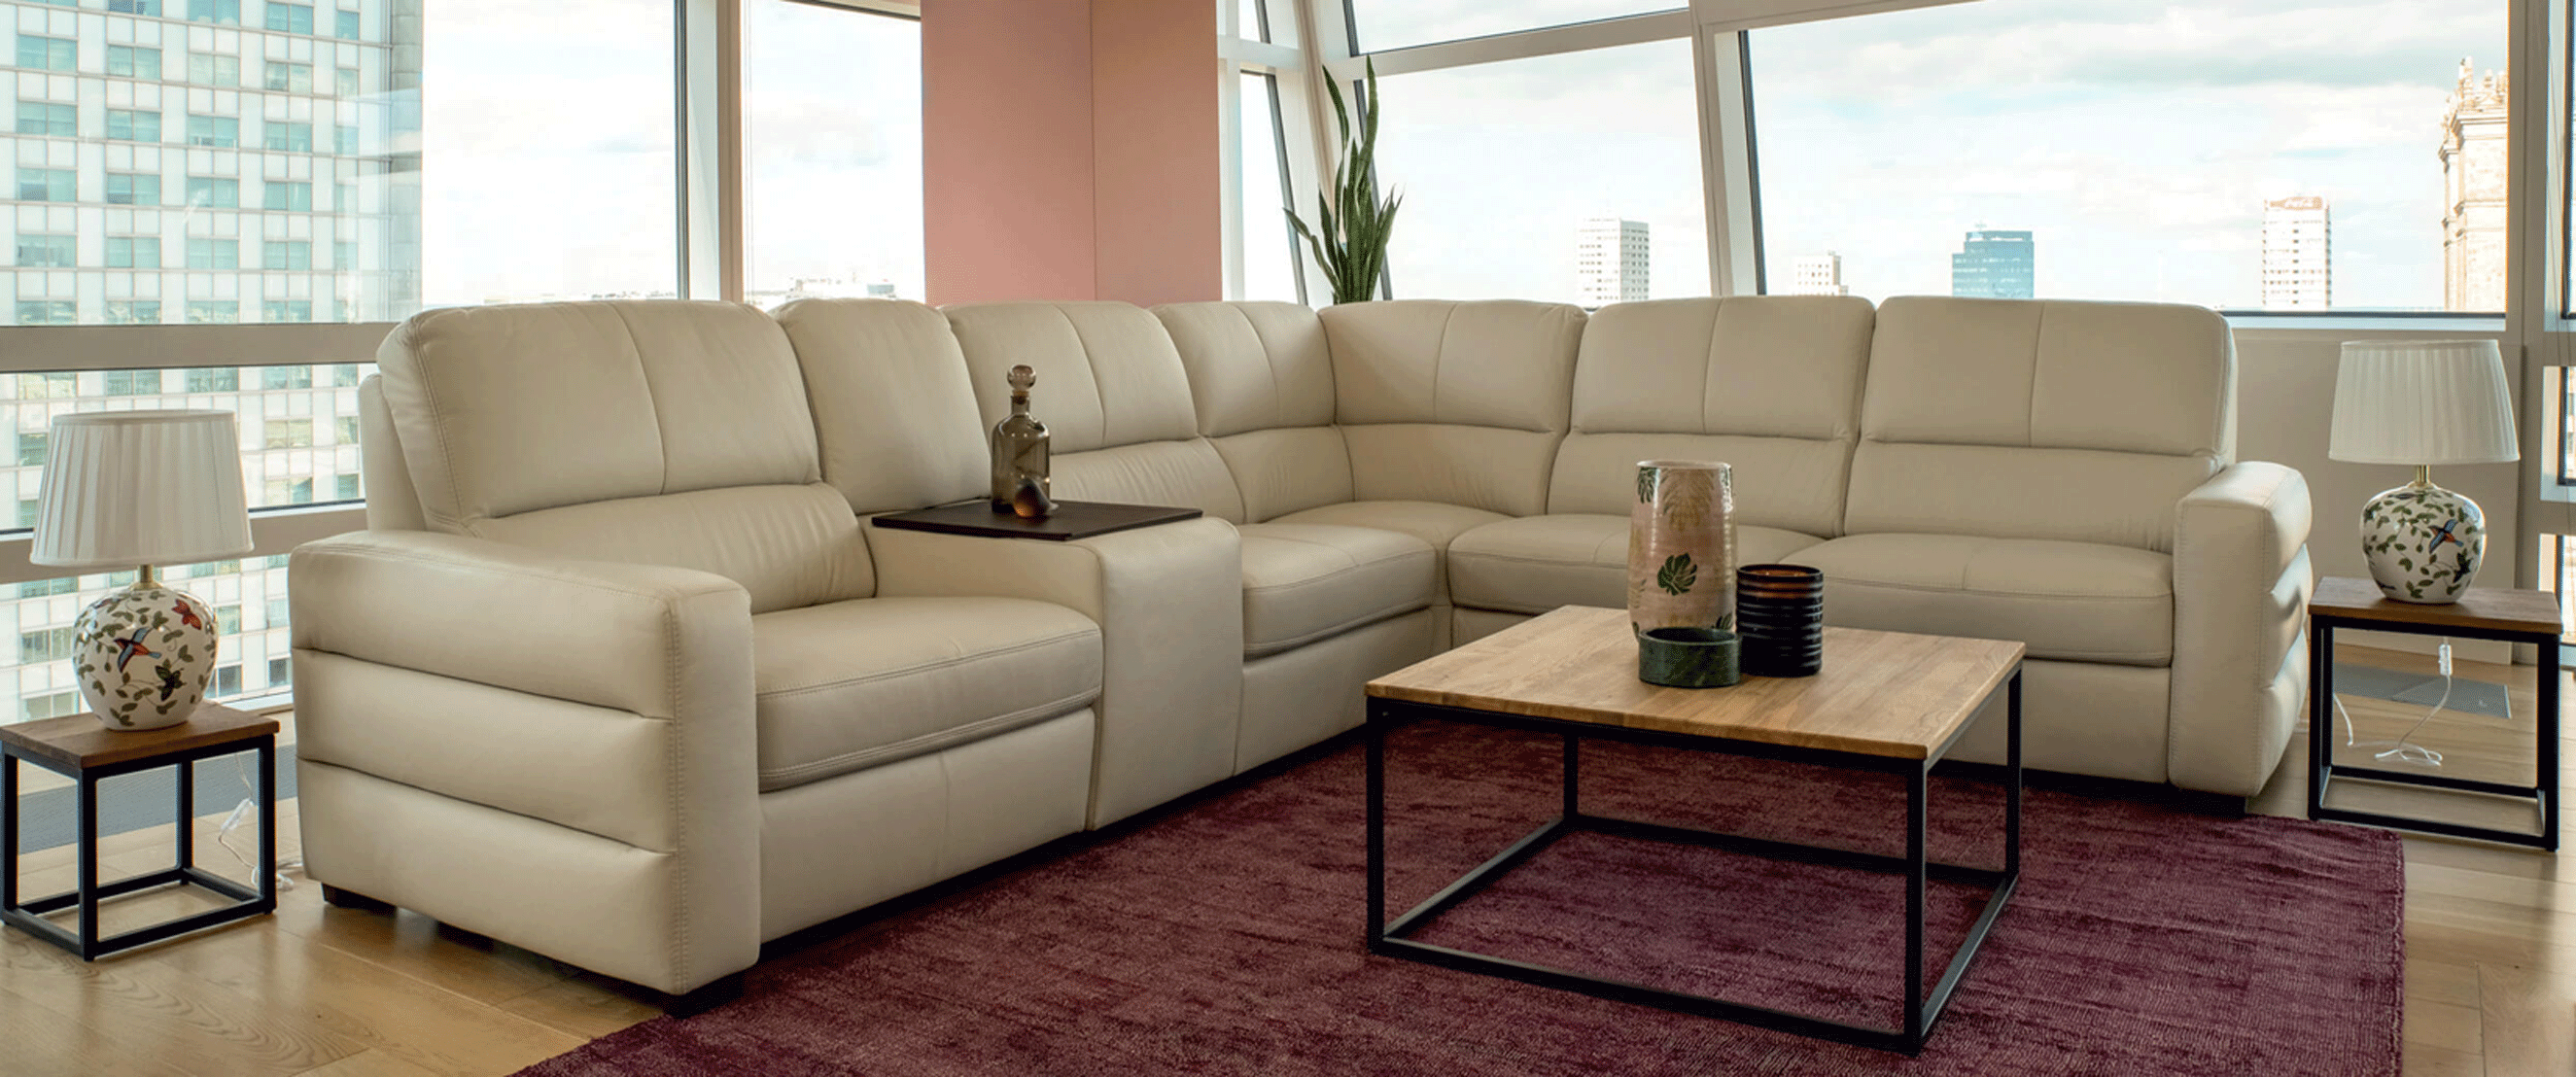 Living Room Furniture Sectionals with Sleepers Karten Sectional